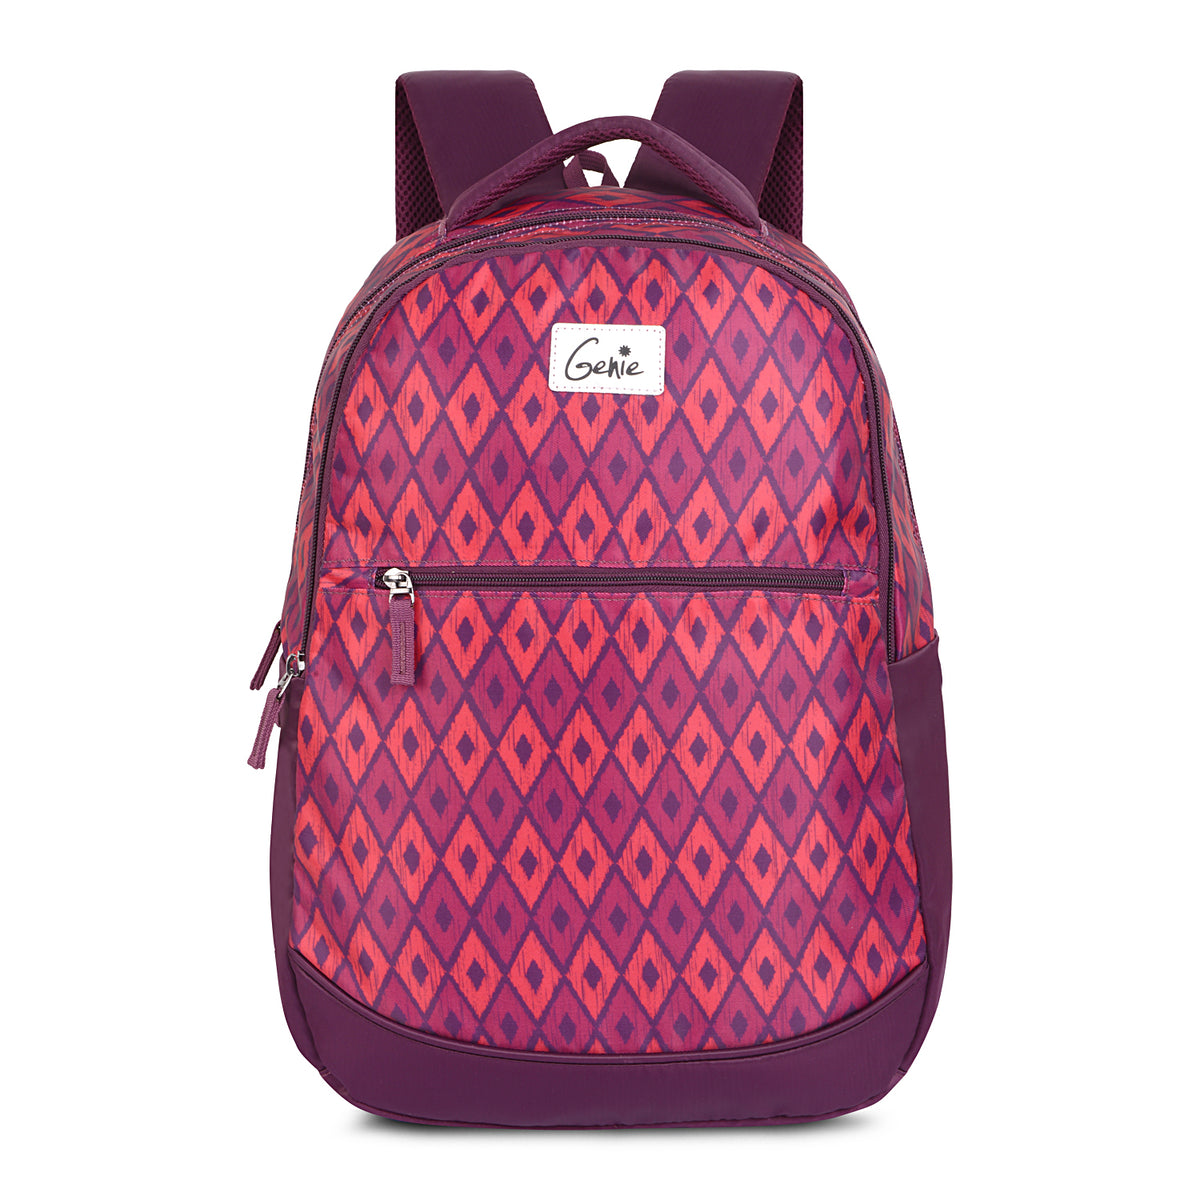 Genie Gypsy 27L Red Juniors Backpack With Easy Access Pockets